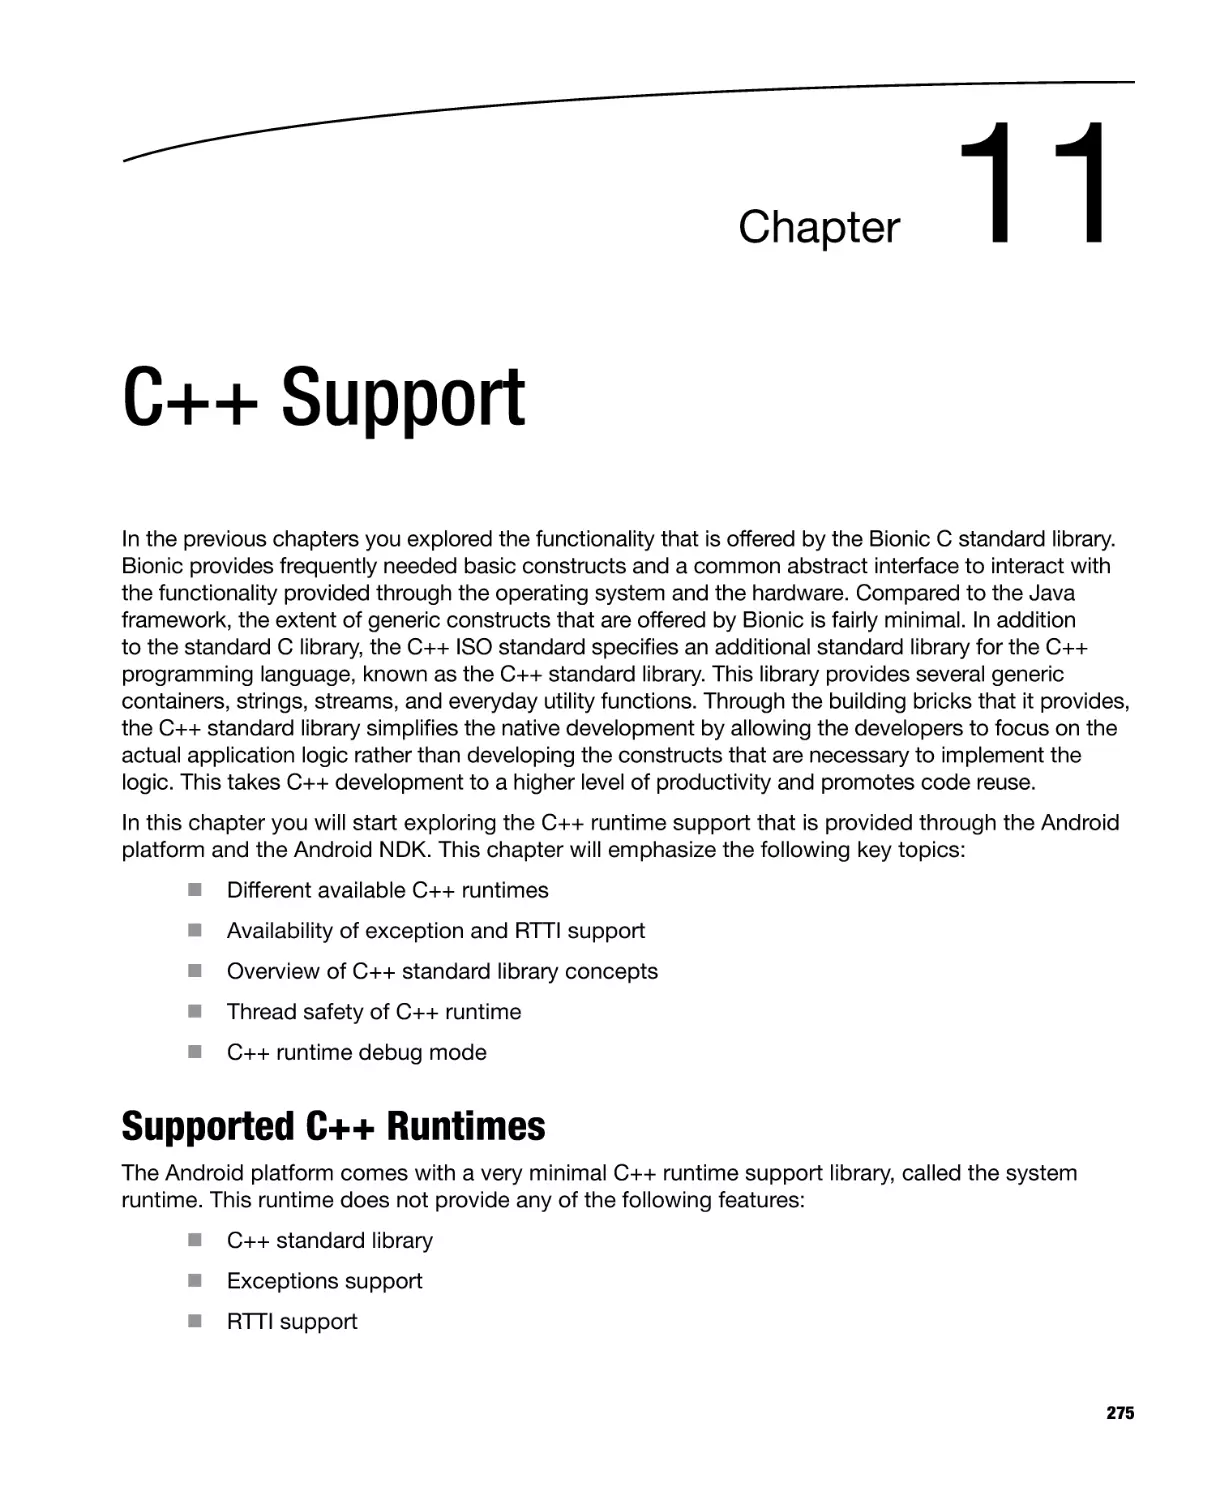 Chapter 11
Supported C++ Runtimes